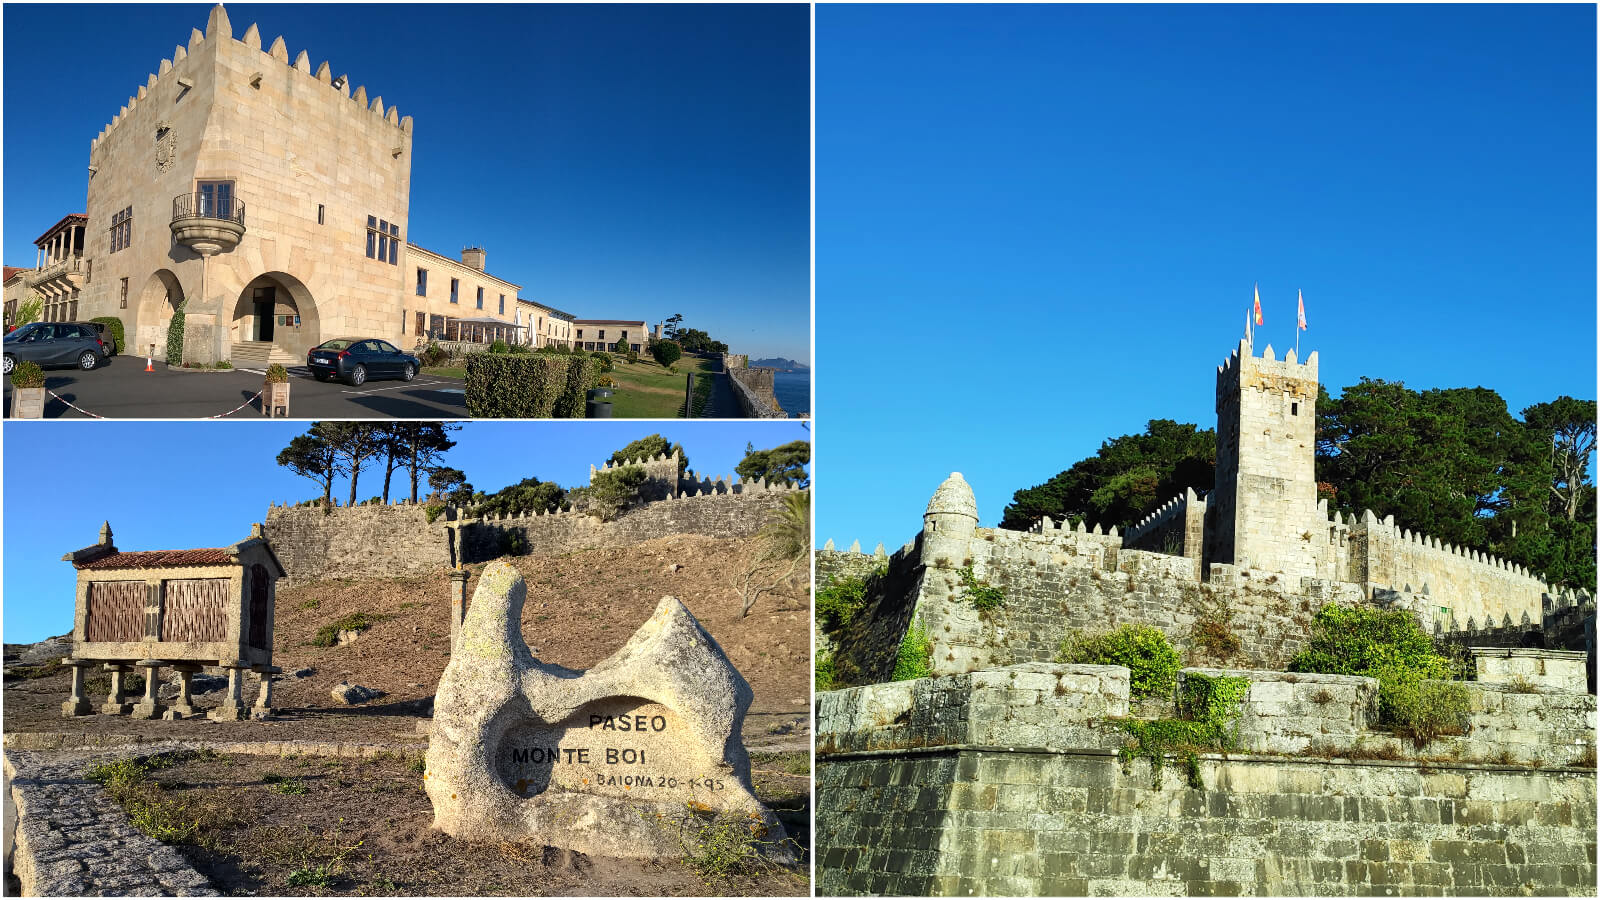 10 Best Things to do in Baiona, Galicia, Spain - 6. Walk Around the Sea Wall of the Monterreal Fortress